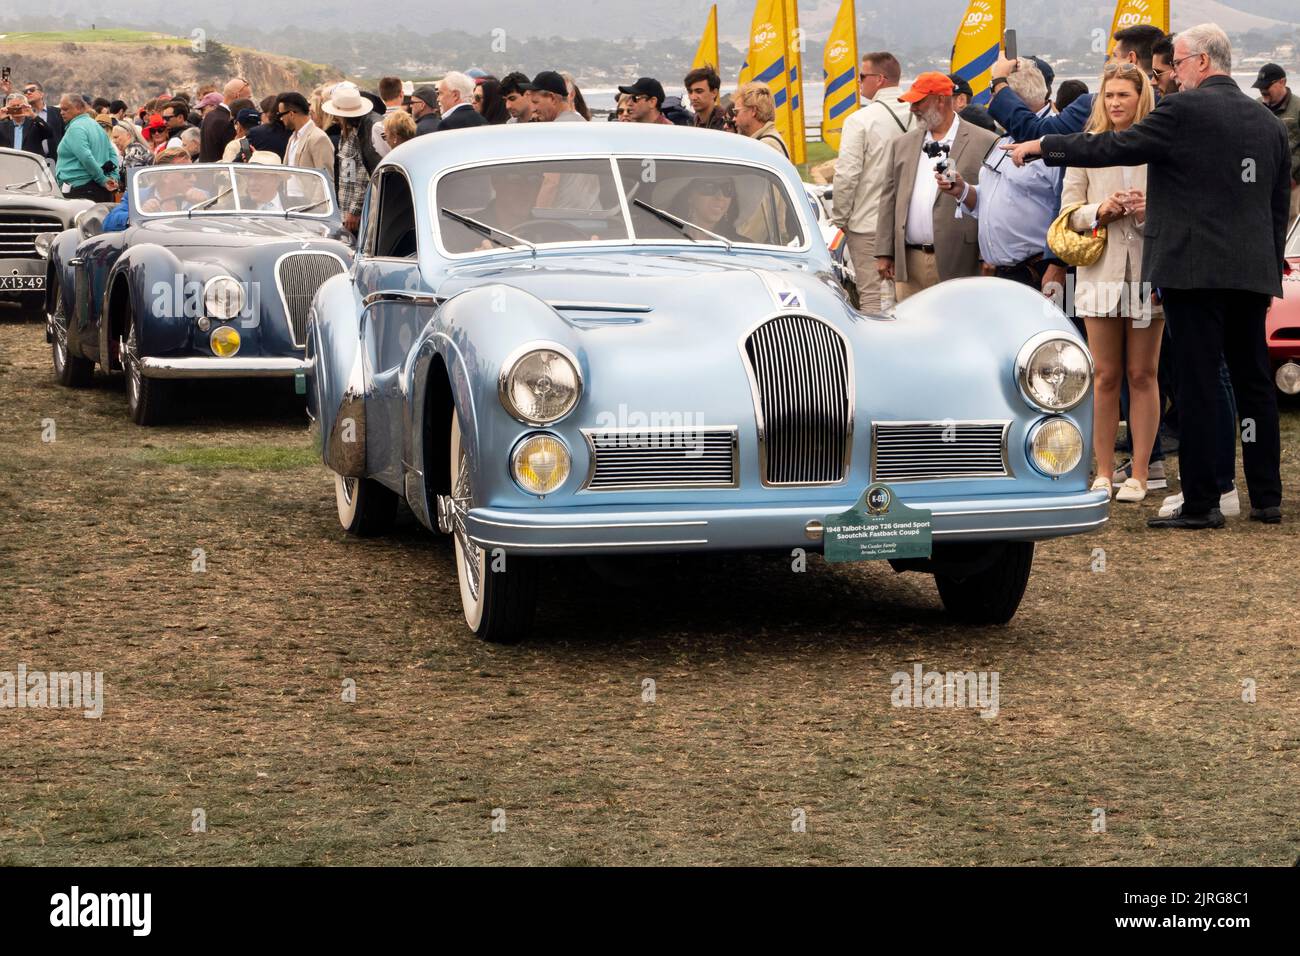 1948 Talbot-Lago T26 Grand SportSaoutchik Fastback Coupe at the 71st Pebble Beach Concours d' Elegance 2022 Stock Photo